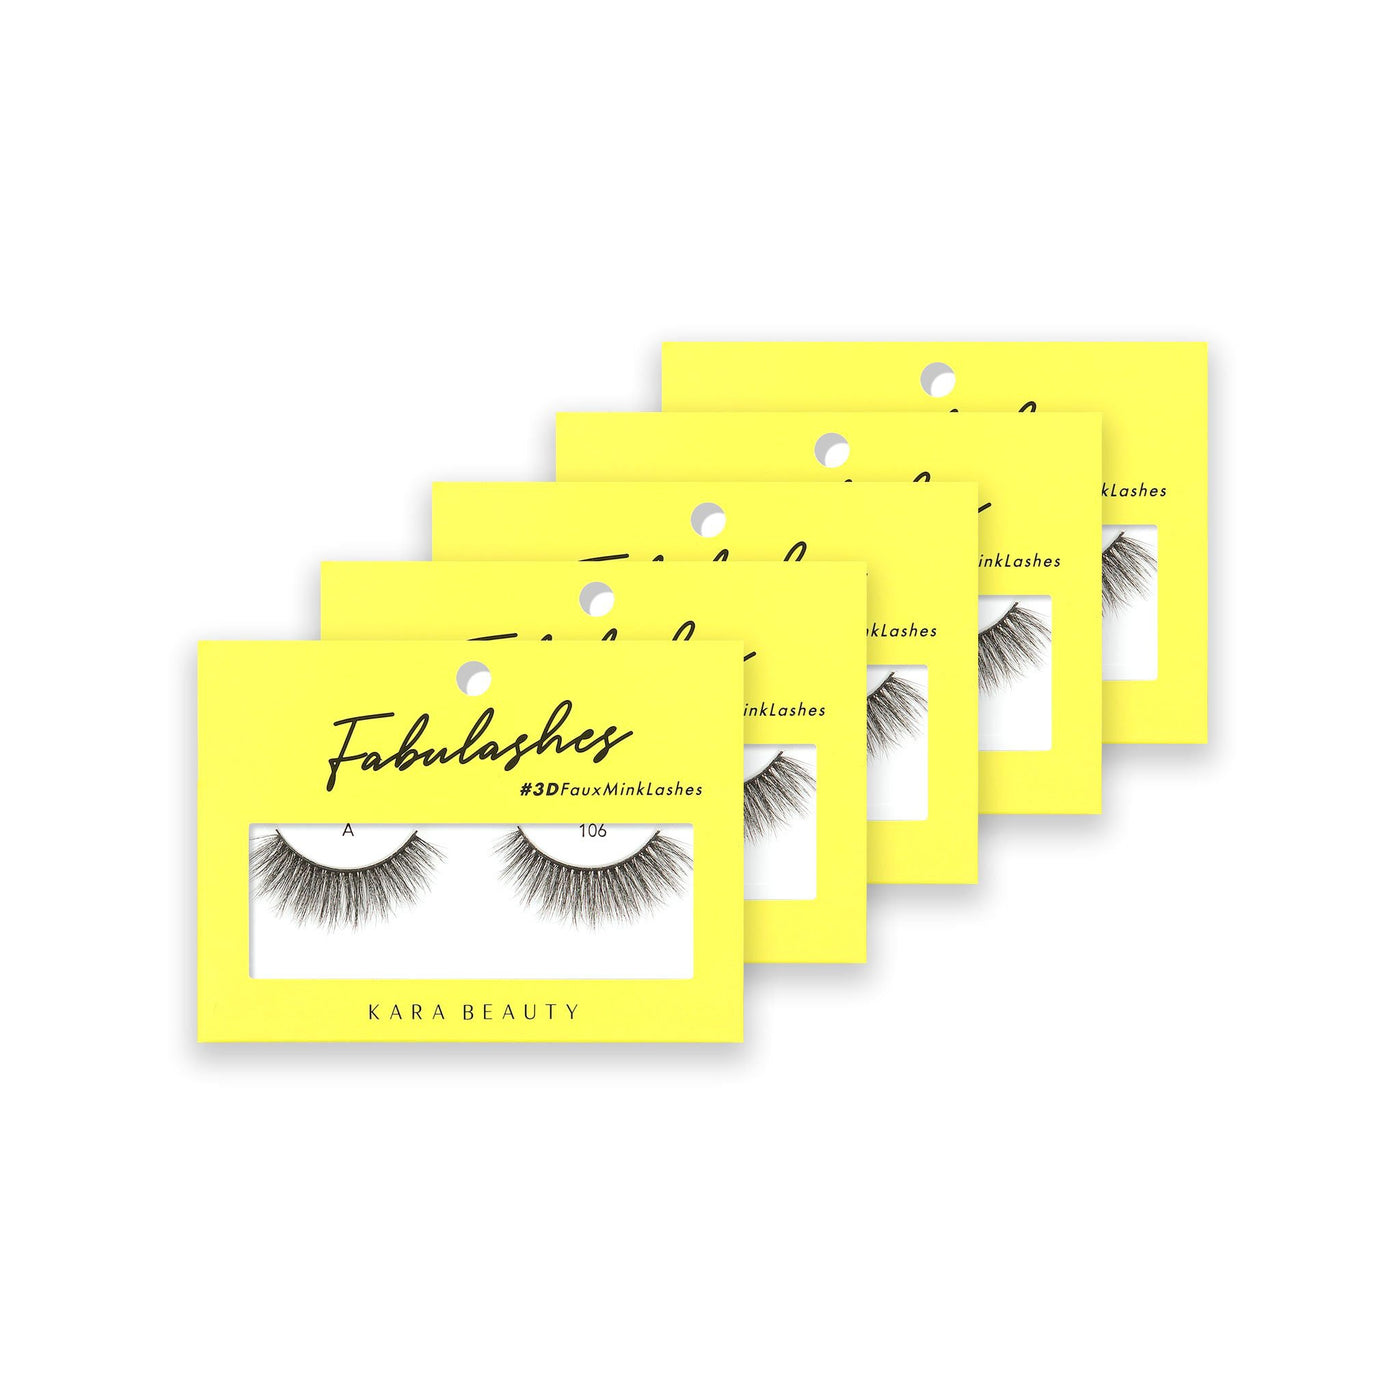 Style A106 Fabulashes 3D Faux Mink Strip Eyelashes 5 pack